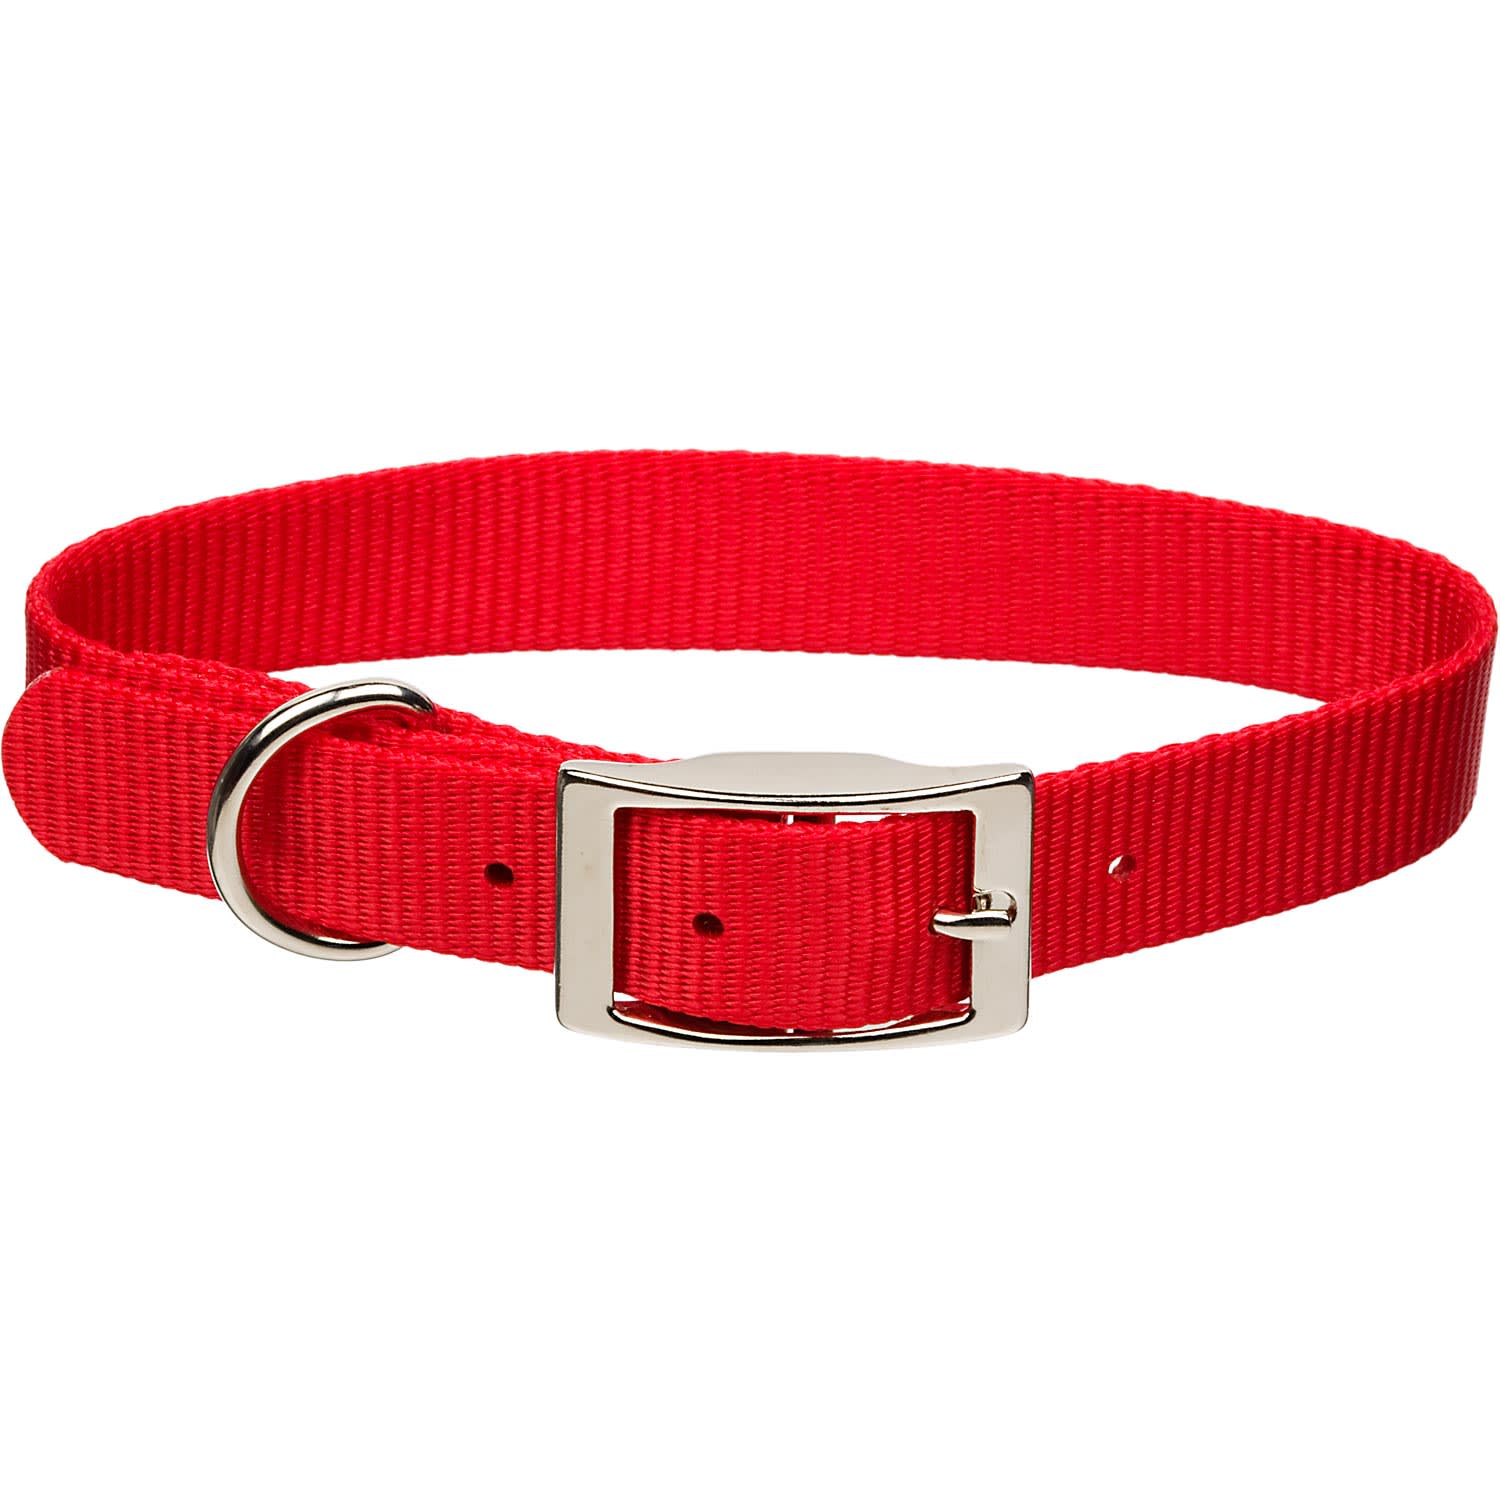 personalized dog collars with metal buckle